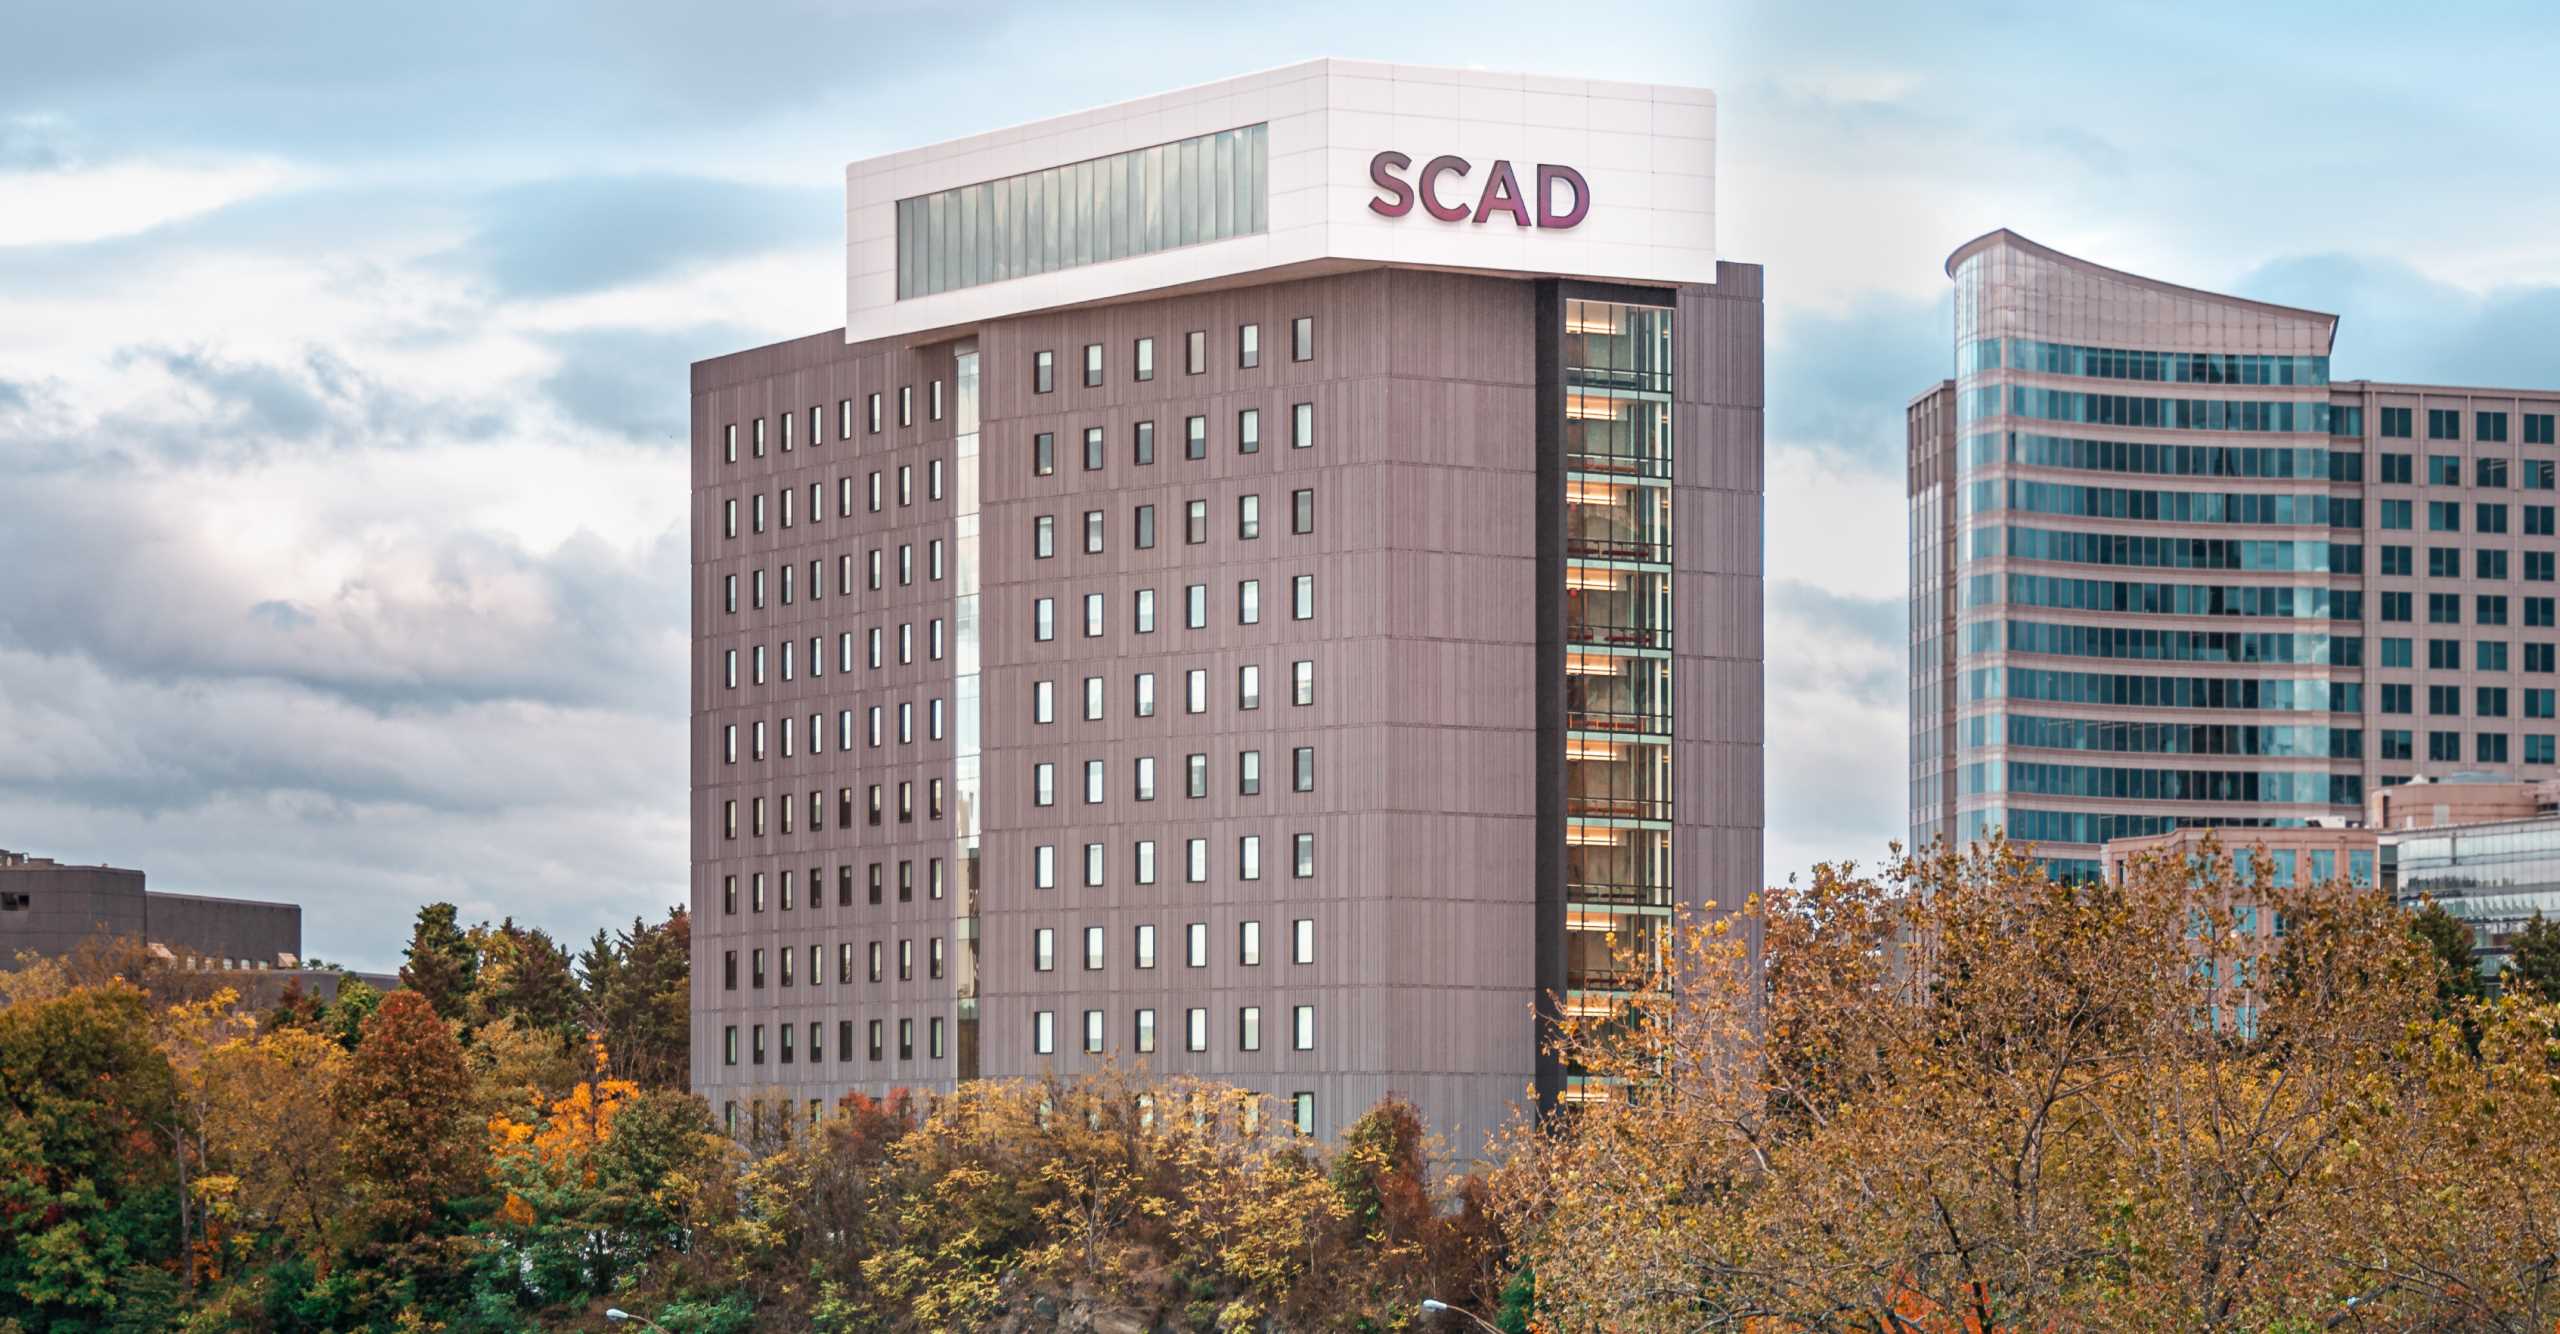 SCAD: FORTY FIVE complex offers impressive Atlanta expansion - So Many  Shows!